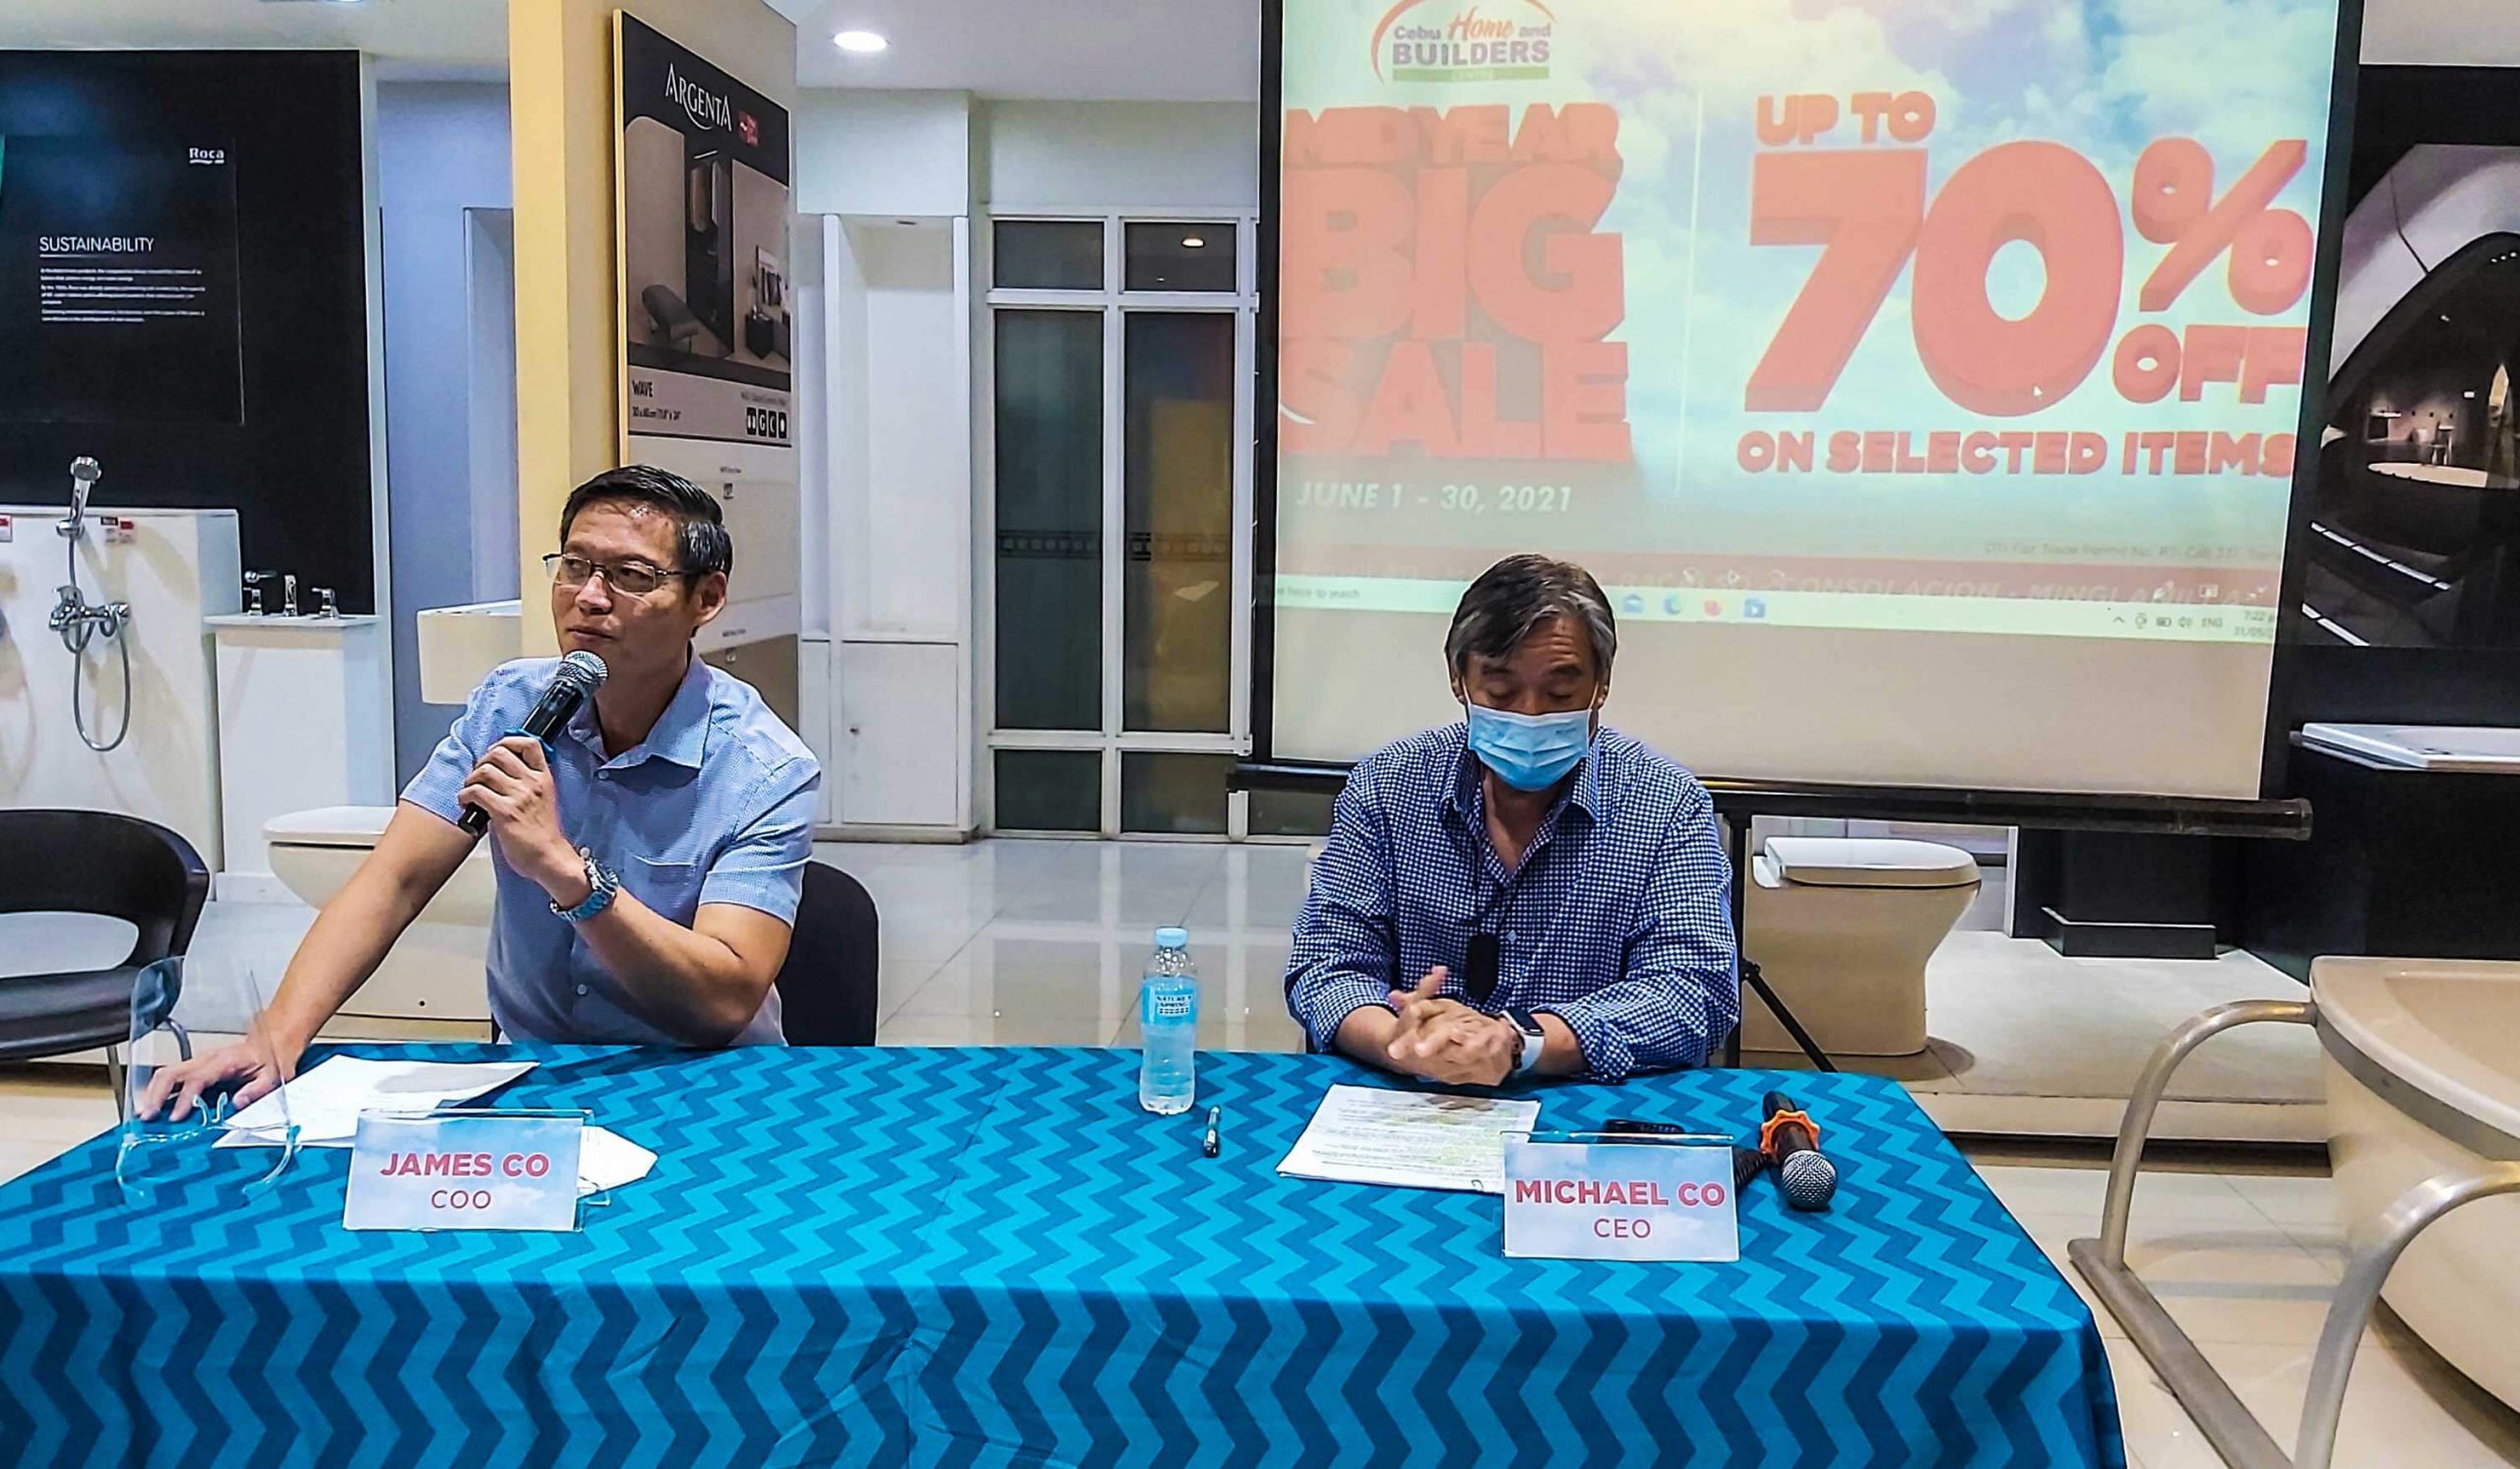 MIDYEAR BIG SALE. Cebu Home and Builders Centre COO James Co answers questions about their sale during a press conference. With James is CEO Michael Co.